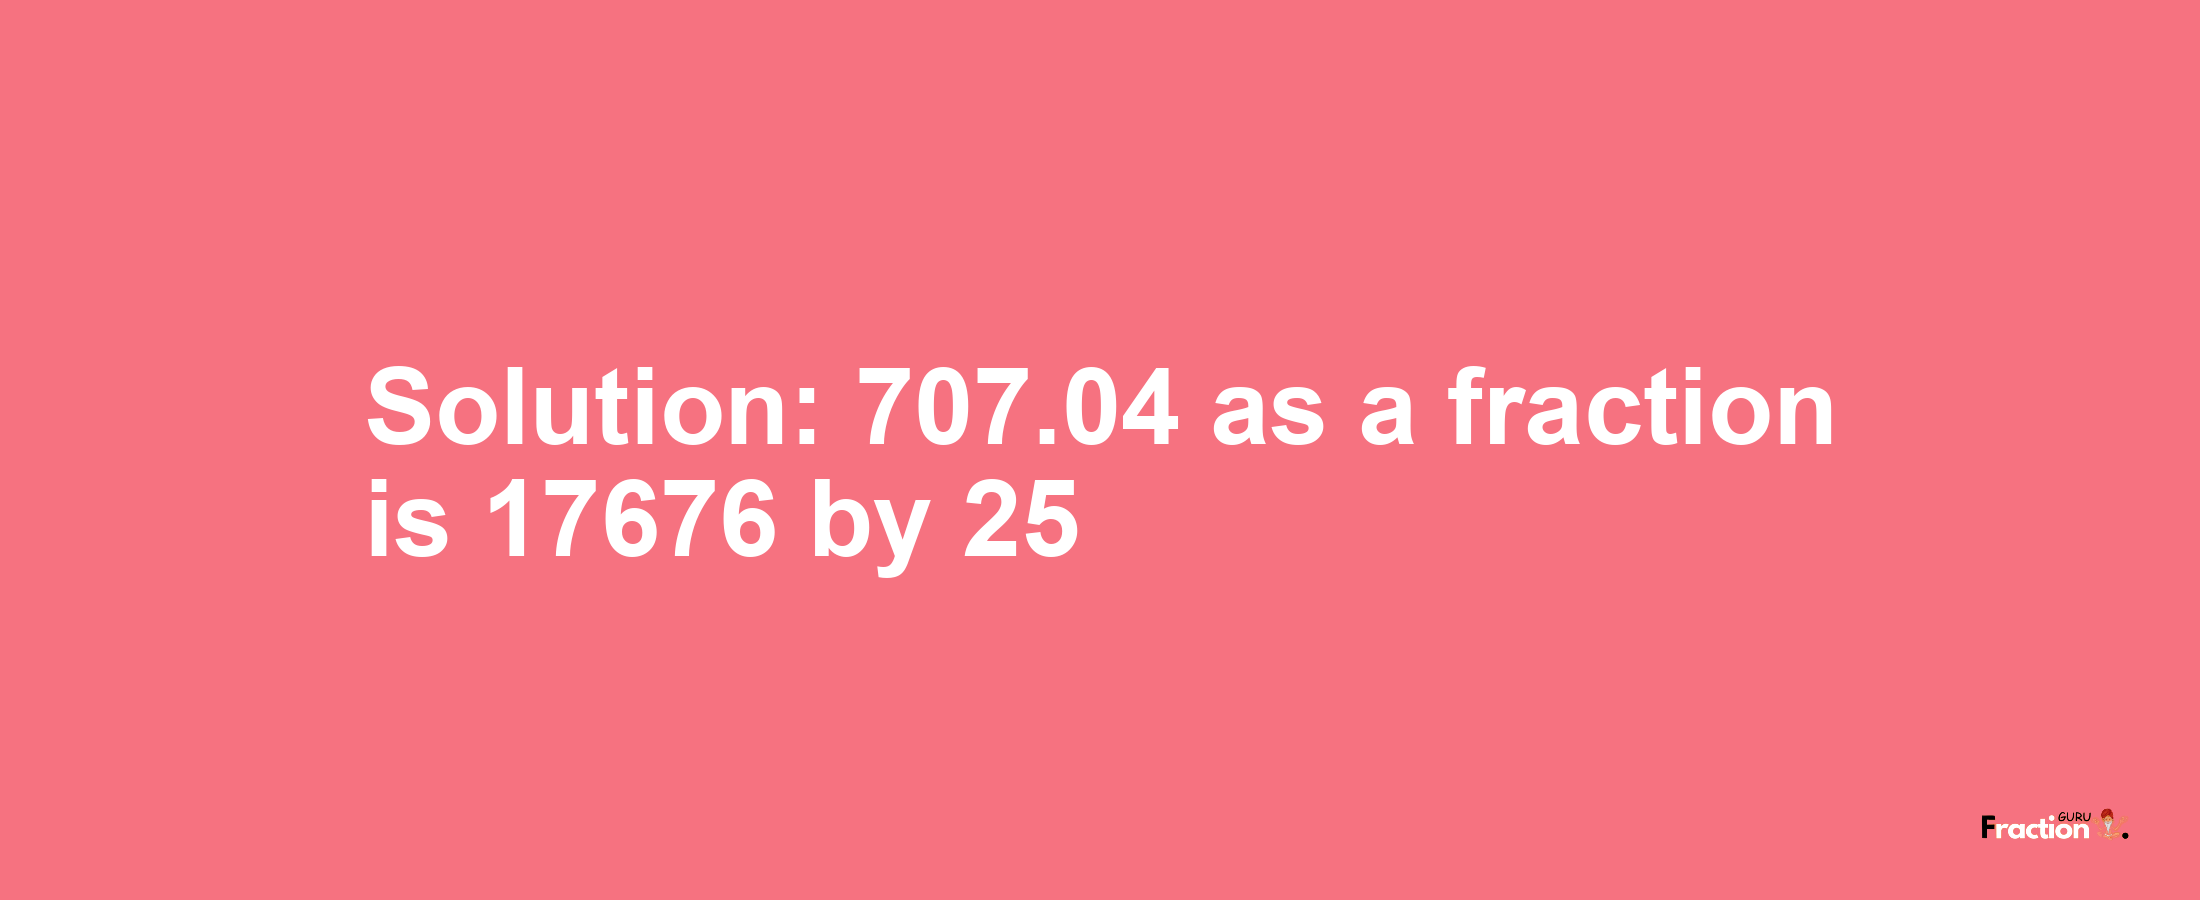 Solution:707.04 as a fraction is 17676/25